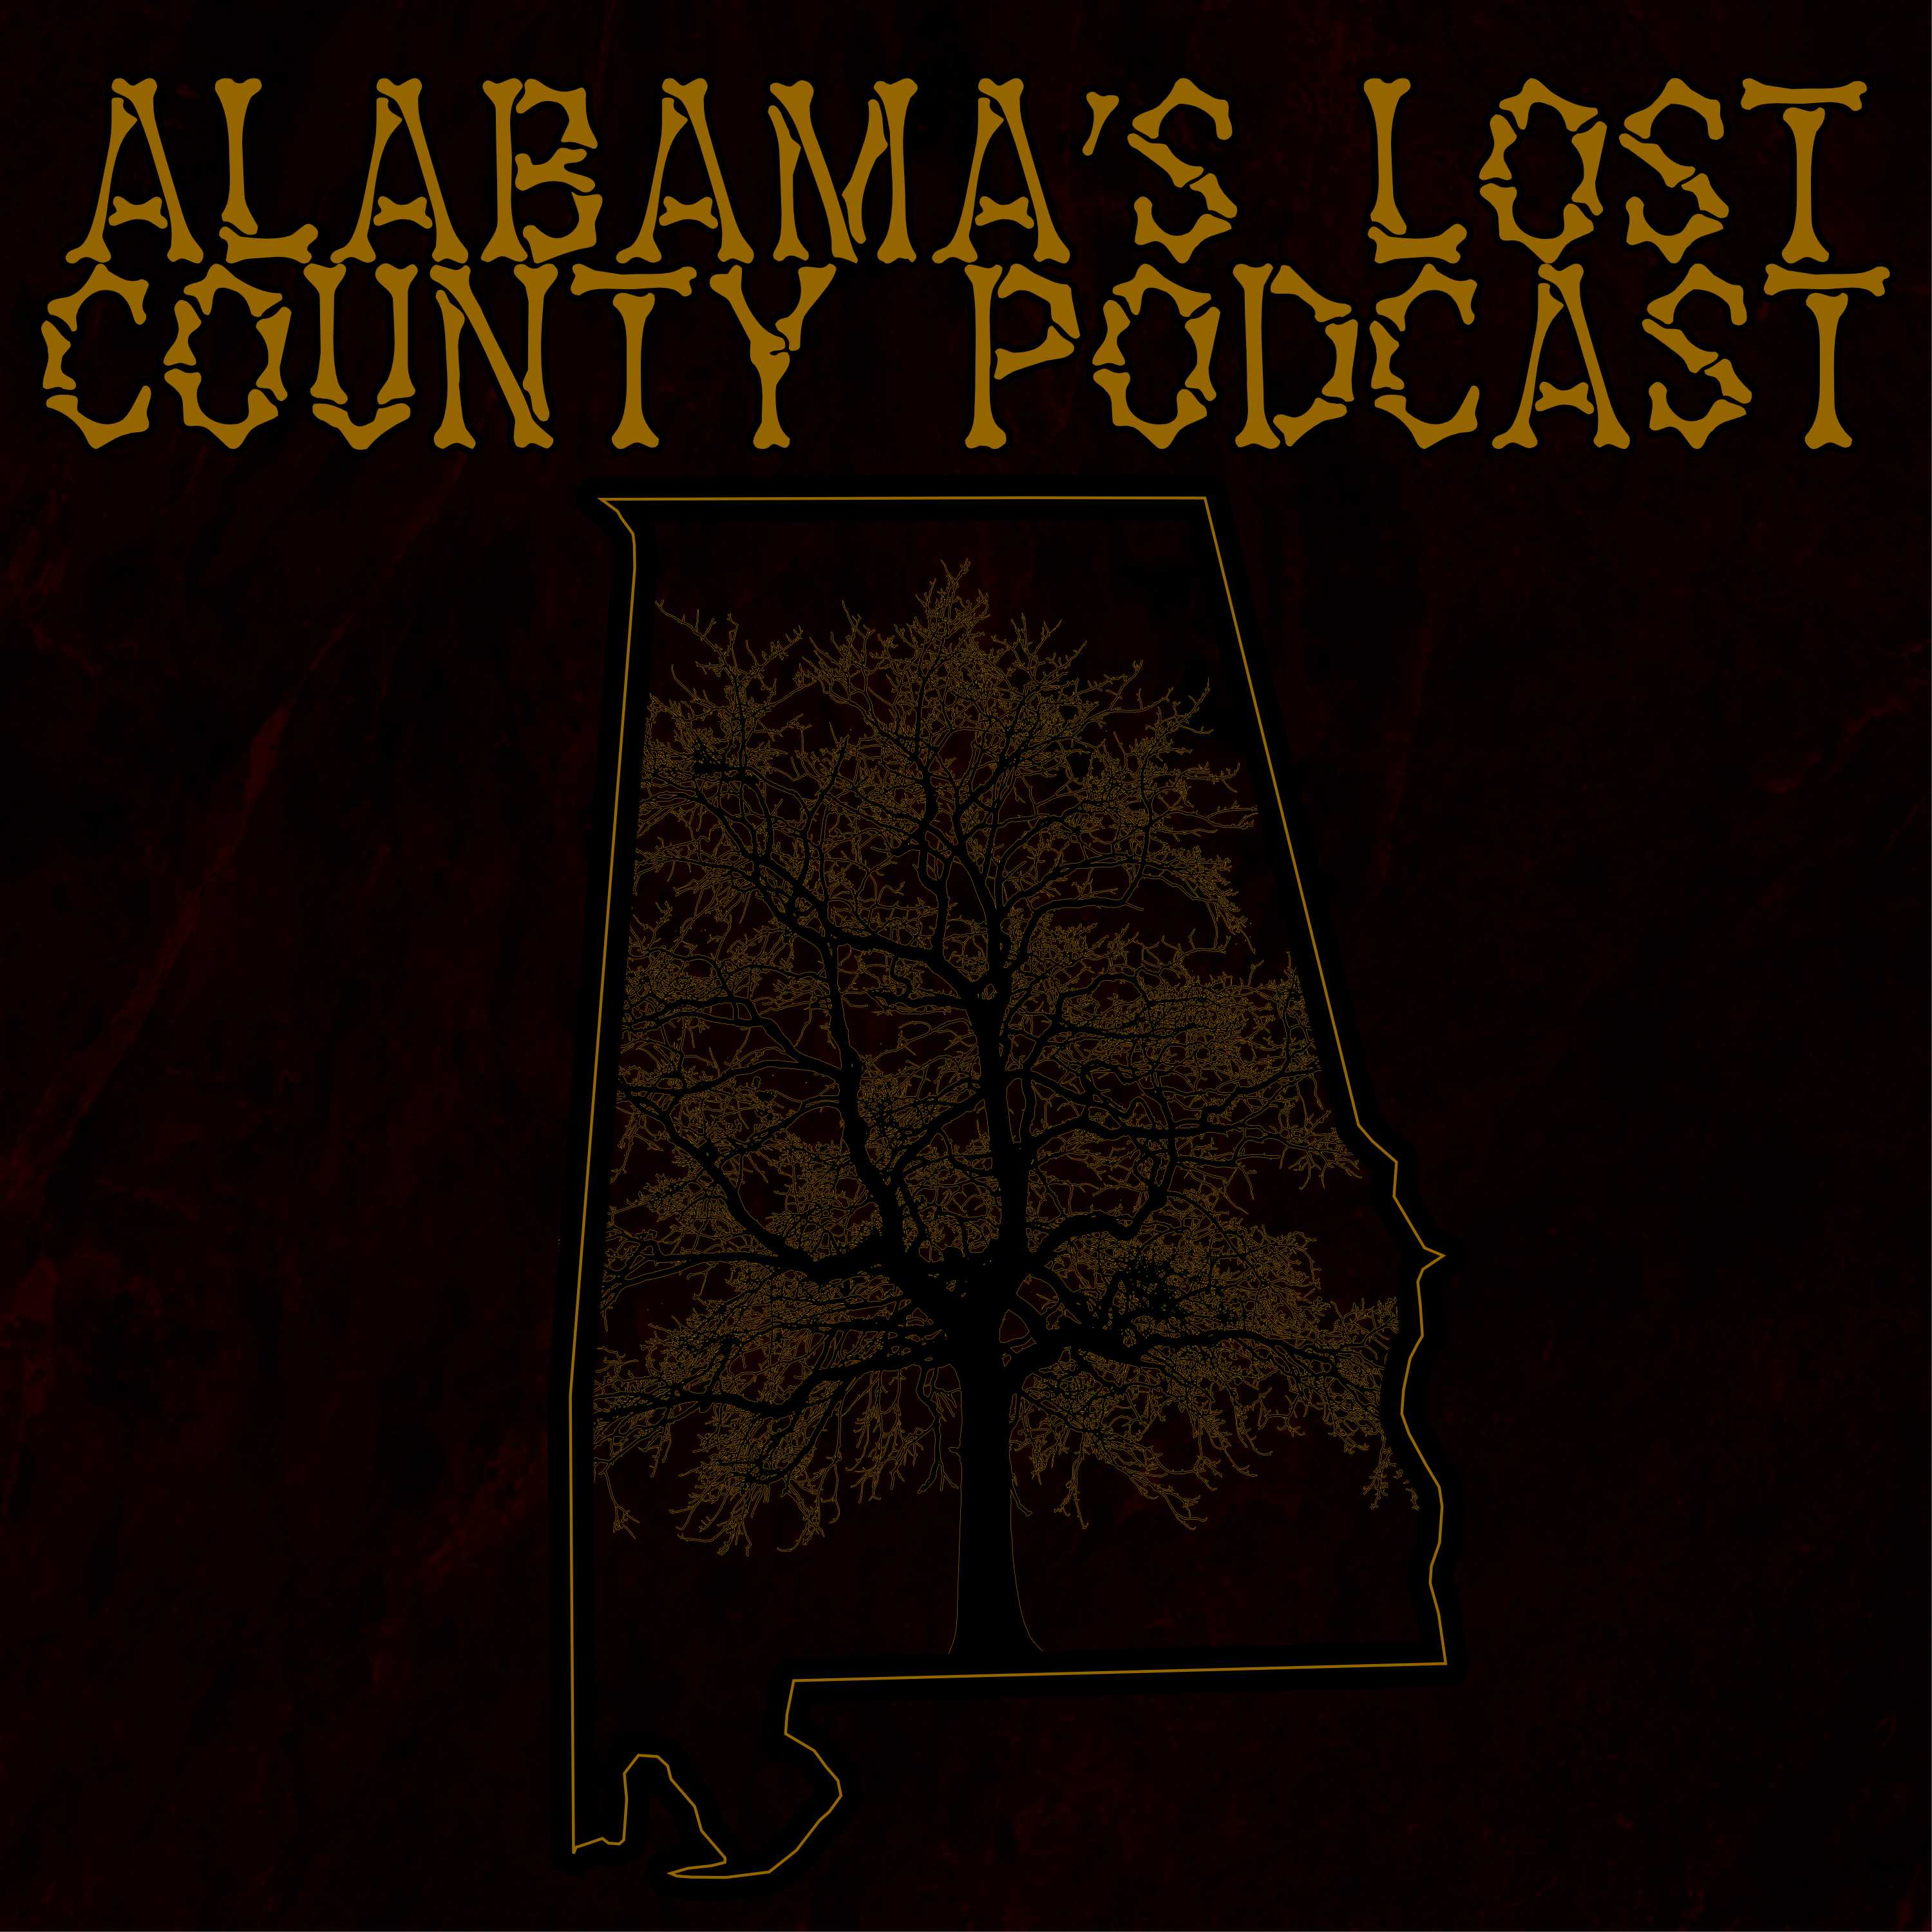 Artwork for Alabama's Lost County